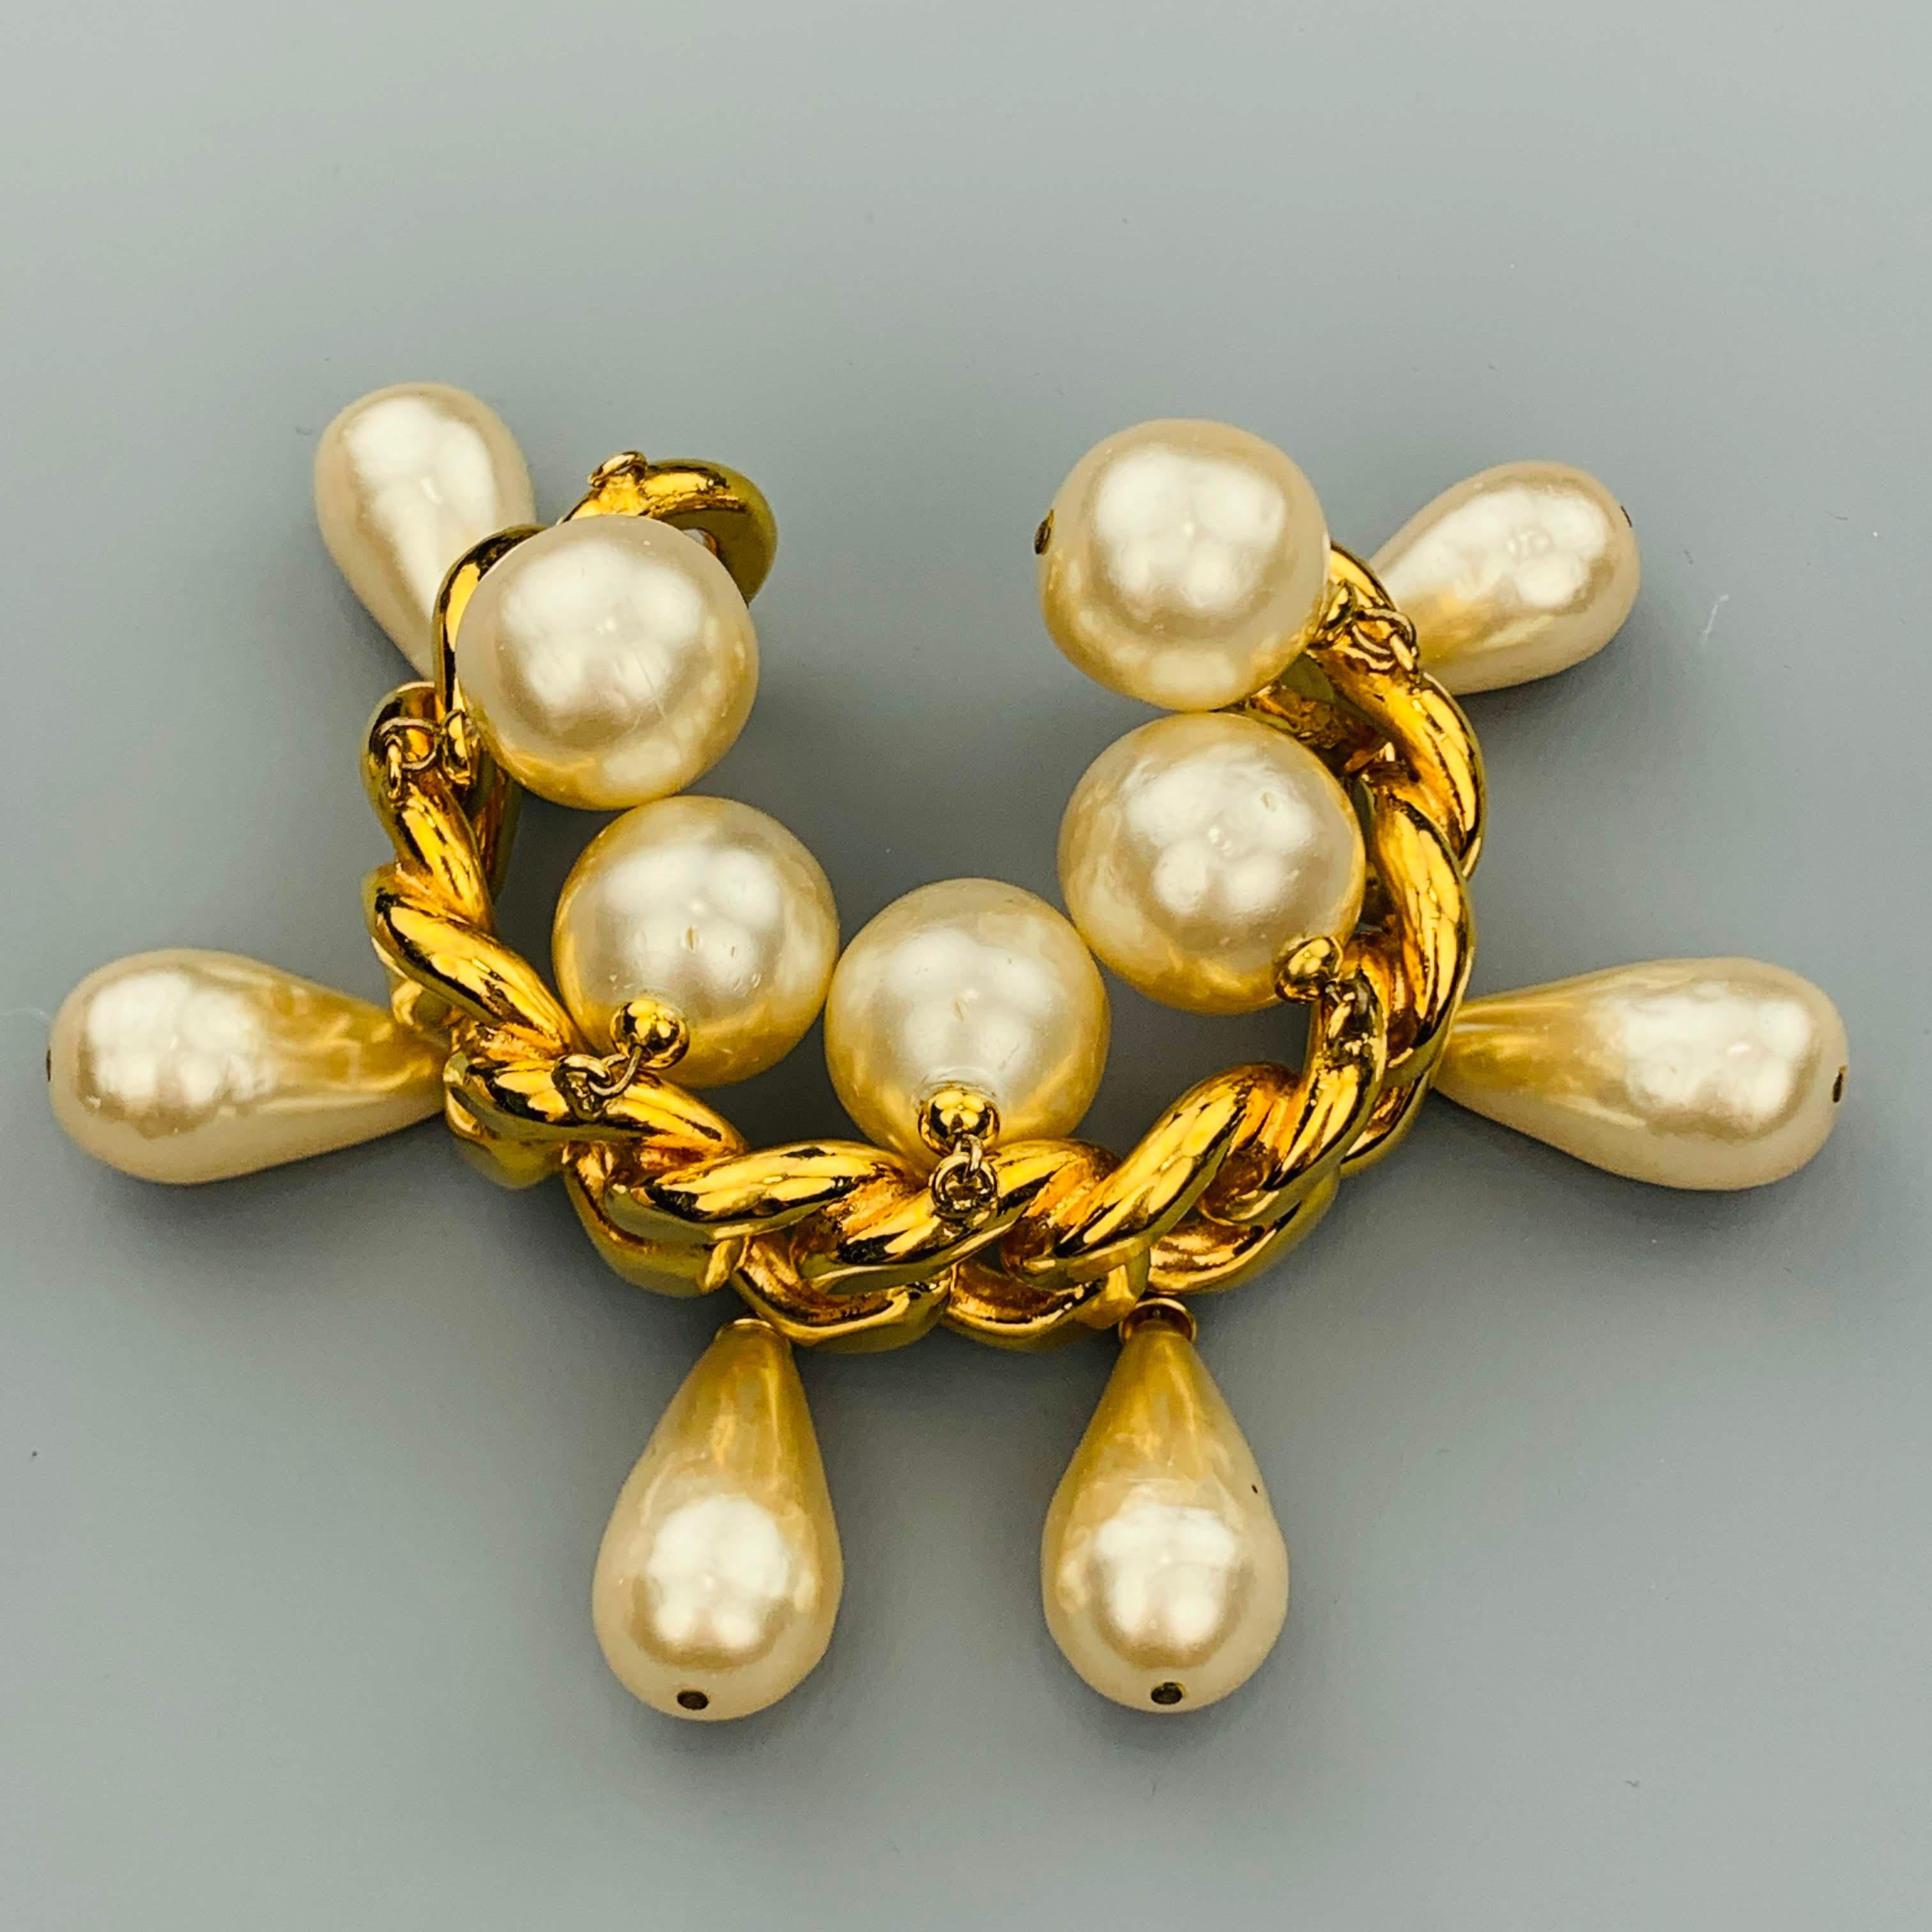 Vintage CHANEL Season 25 (Circa 1986-1992) cuff bracelet by Victoria de Castellaine features a stiff yellow gold tone chain cuff with round faux pearl charms on top and teardrop shaped faux pearls on bottom. Missing a round pearl. As-is. Made in